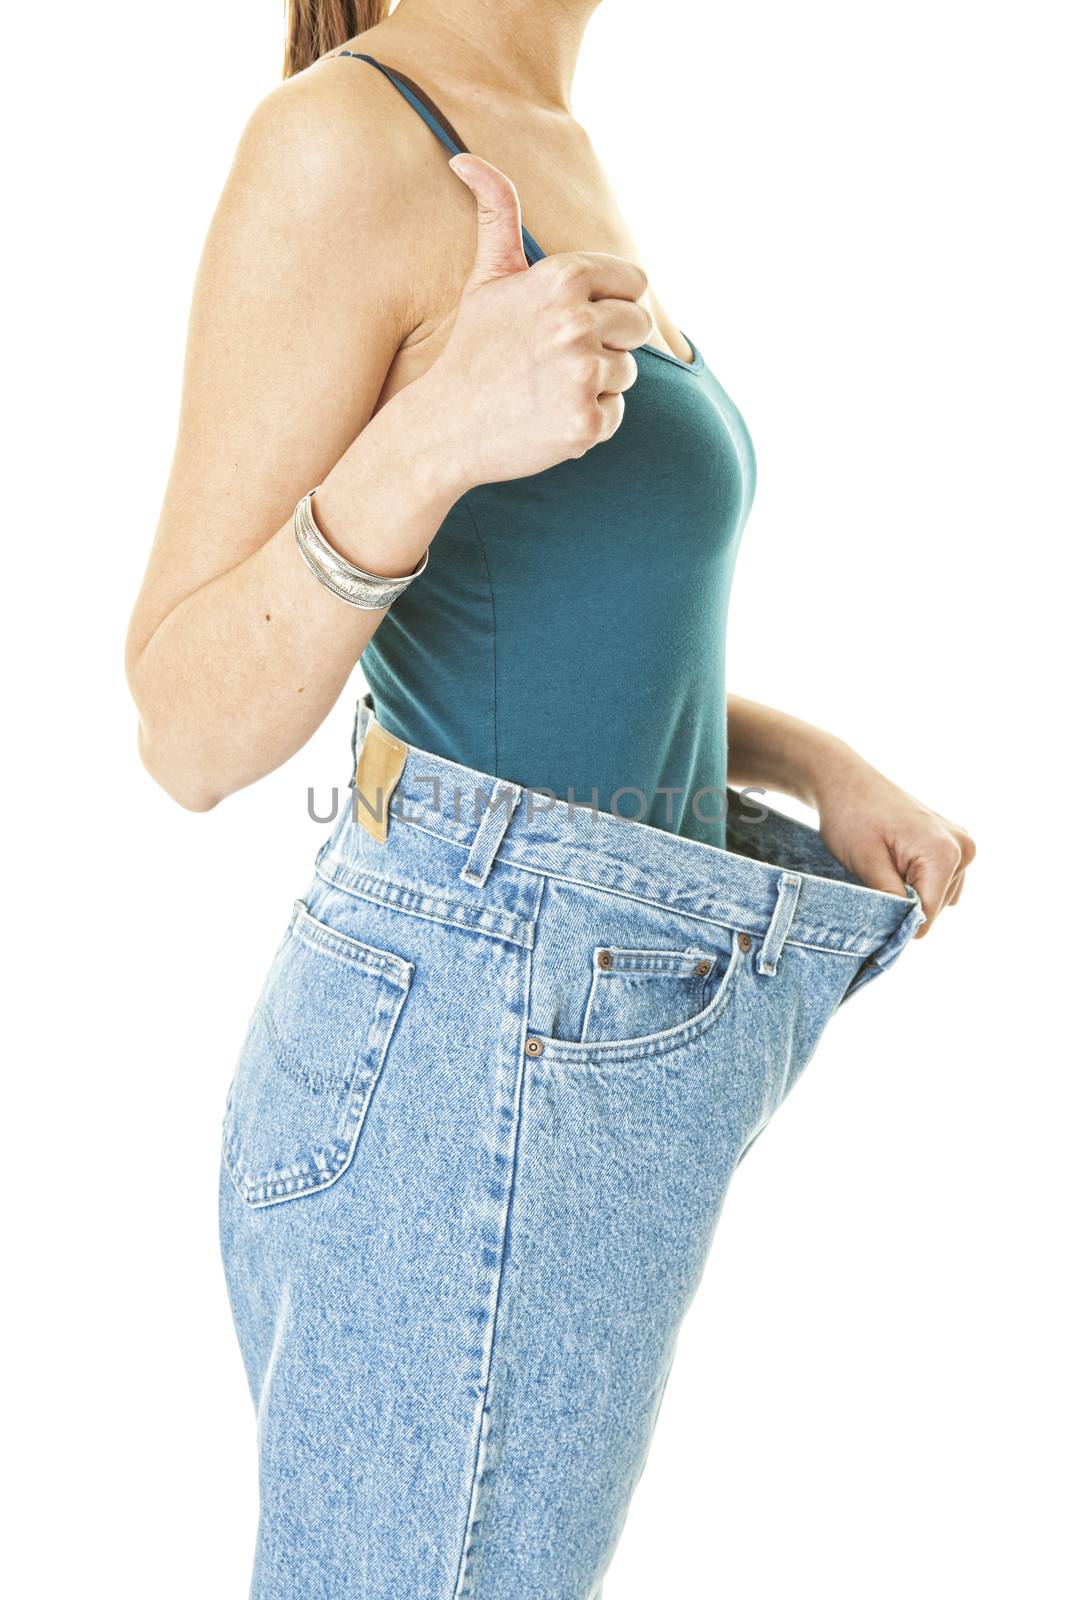  A woman showing off her dieting success.  Shot on white background.